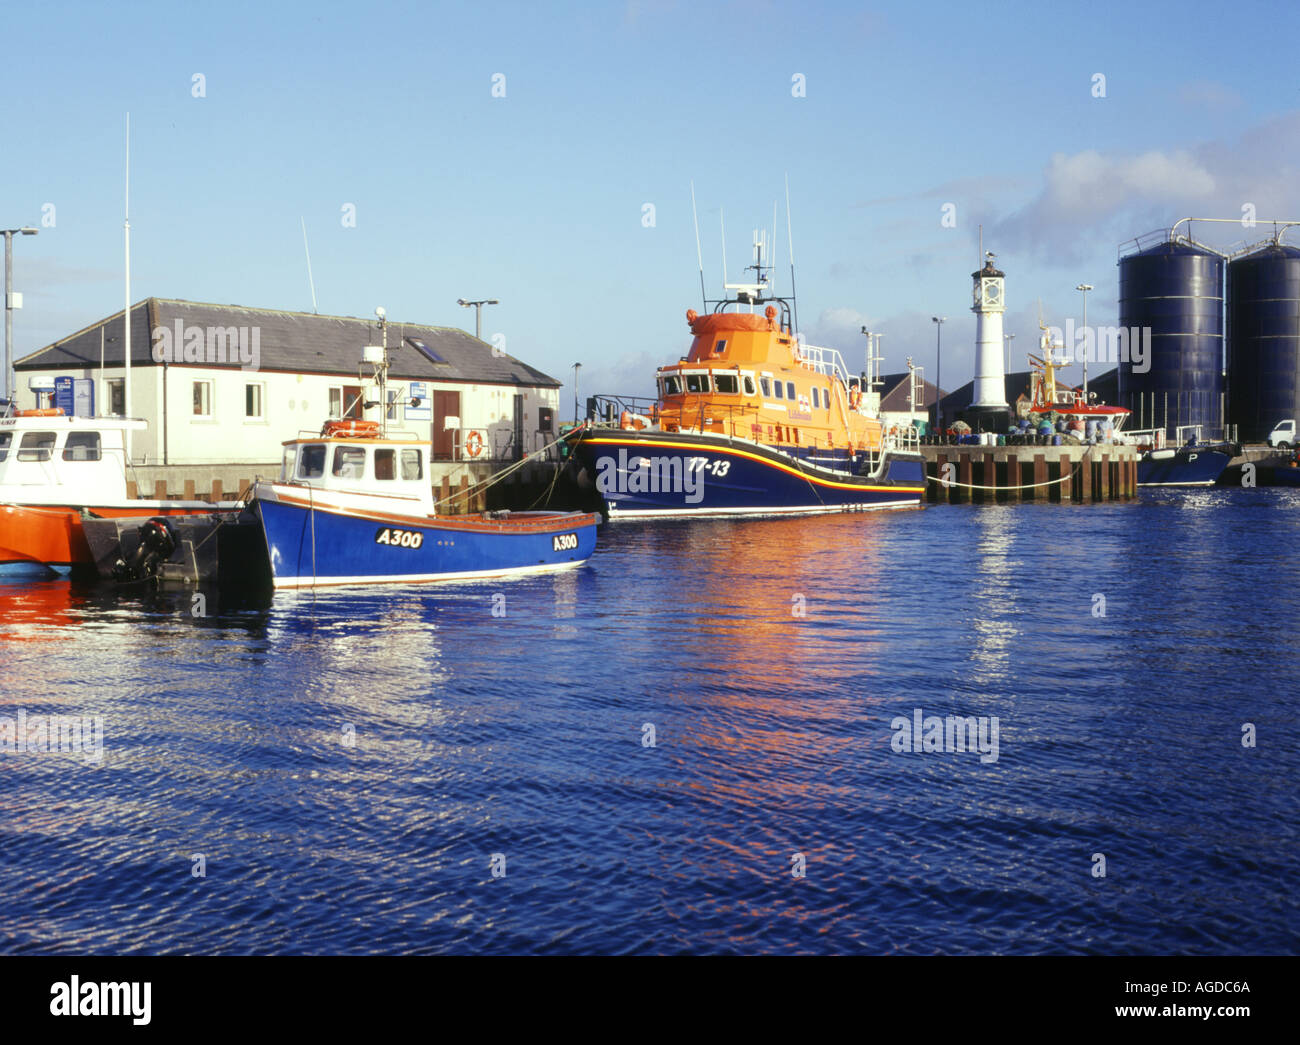 dh Rnli lifeboat scotland KIRKWALL HARBOUR ORKNEY ISLES Quayside fishing boats RNLB life boat Stock Photo